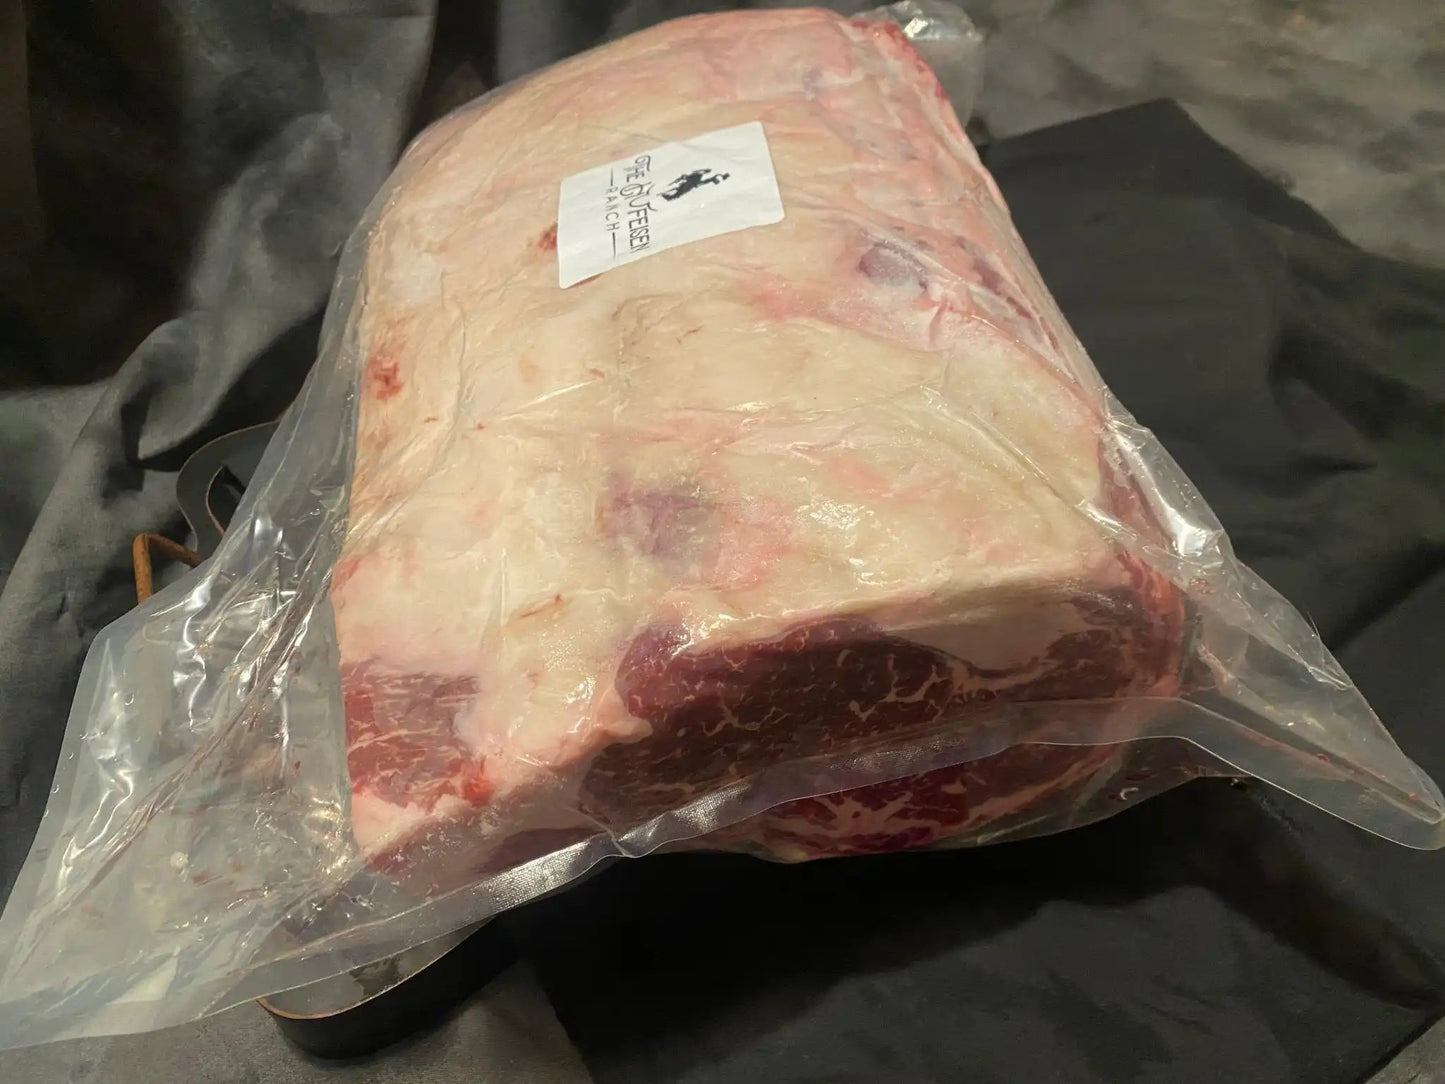 100% All-Natural Grass-Fed Pasture-Raised Wagyu Bone-in Prime Rib Roast - The Hufeisen-Ranch (WYO Wagyu)